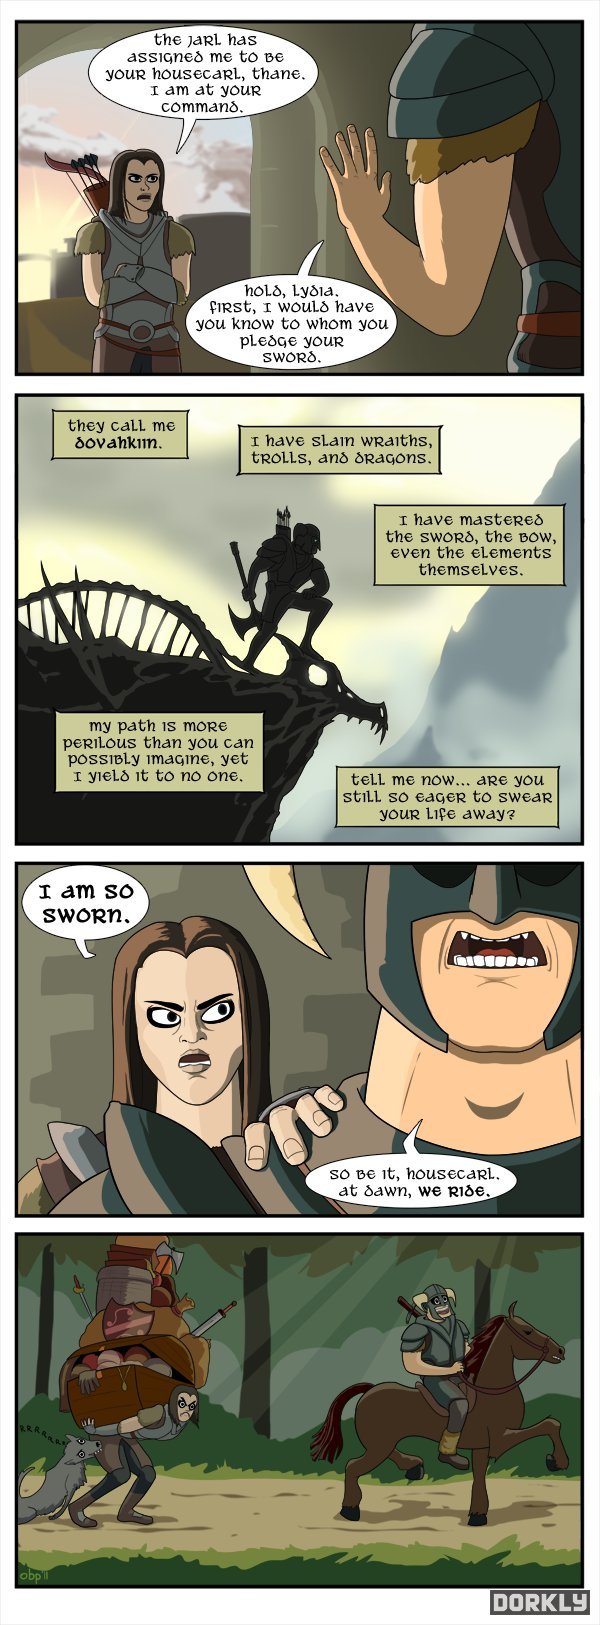 dorkly skyrim comics - the jarl has assigned me to be your housecarl, thane. I am at your command. hold, Lydia first, I would have you know to whom you pledge your Sword. they call me dovankin. I have slain wraiths, trolls, and dragons. I have mastered th